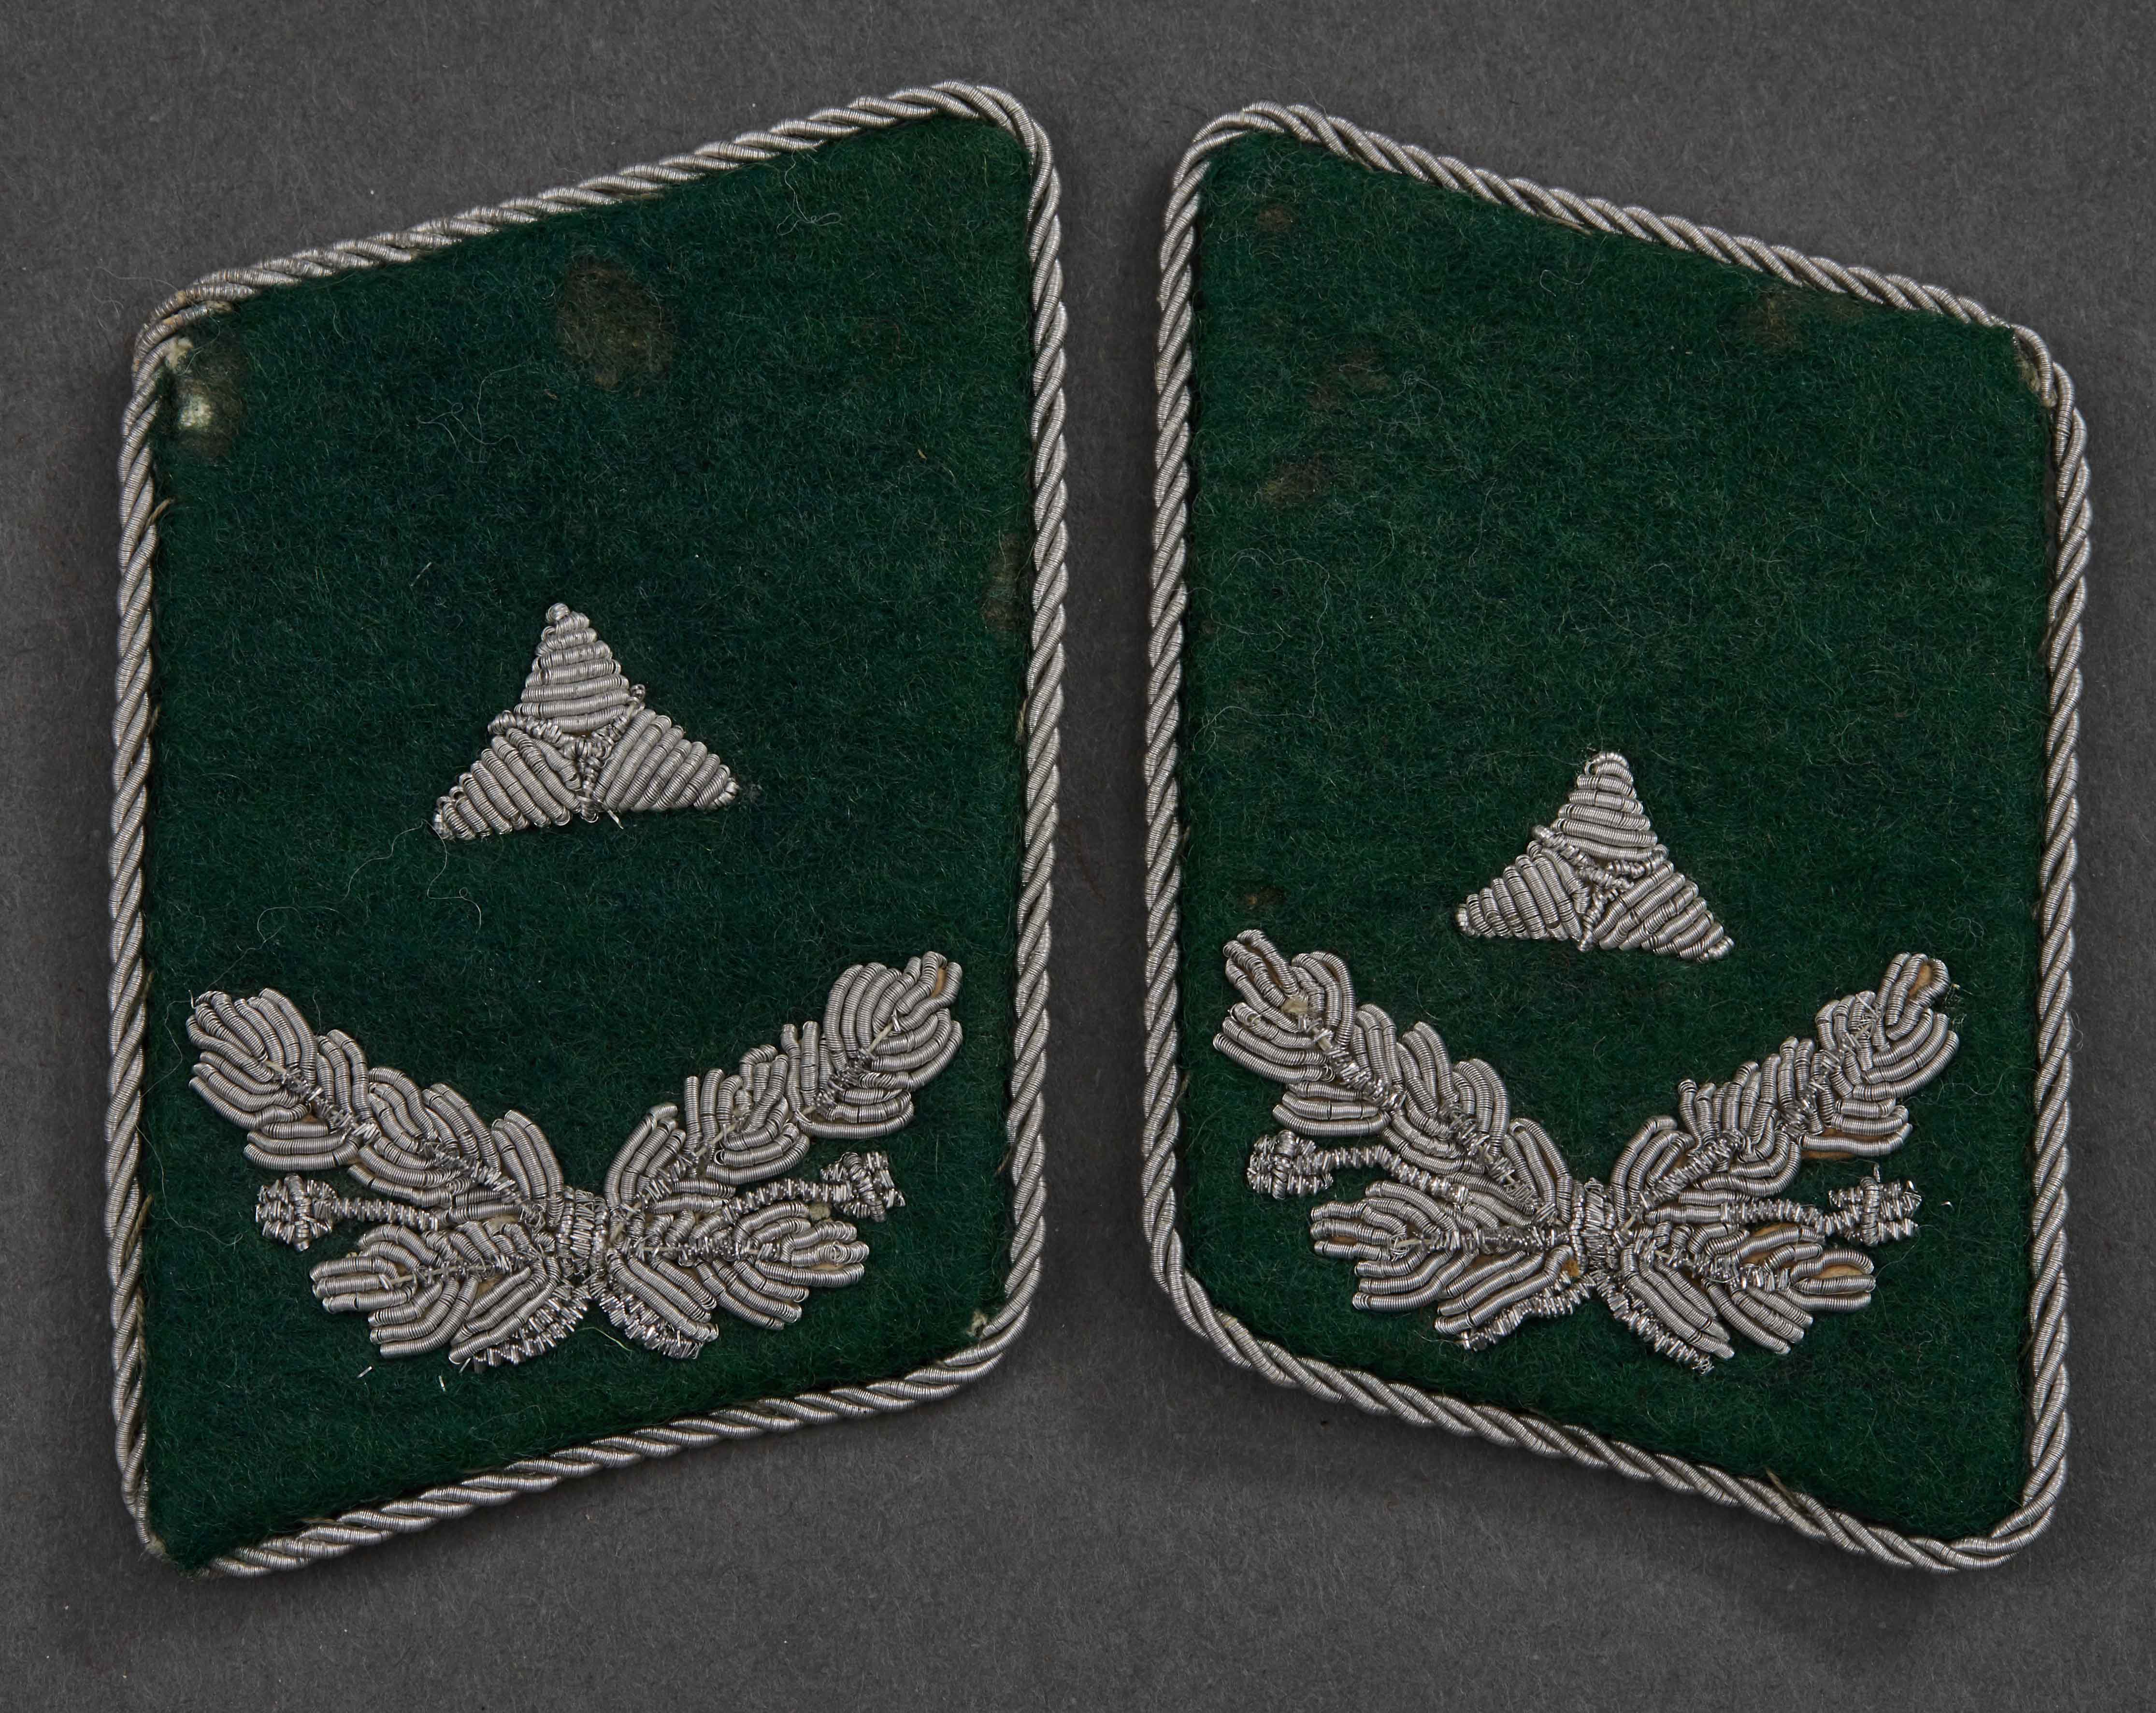 Luftwaffe Admin. Official's Tab's